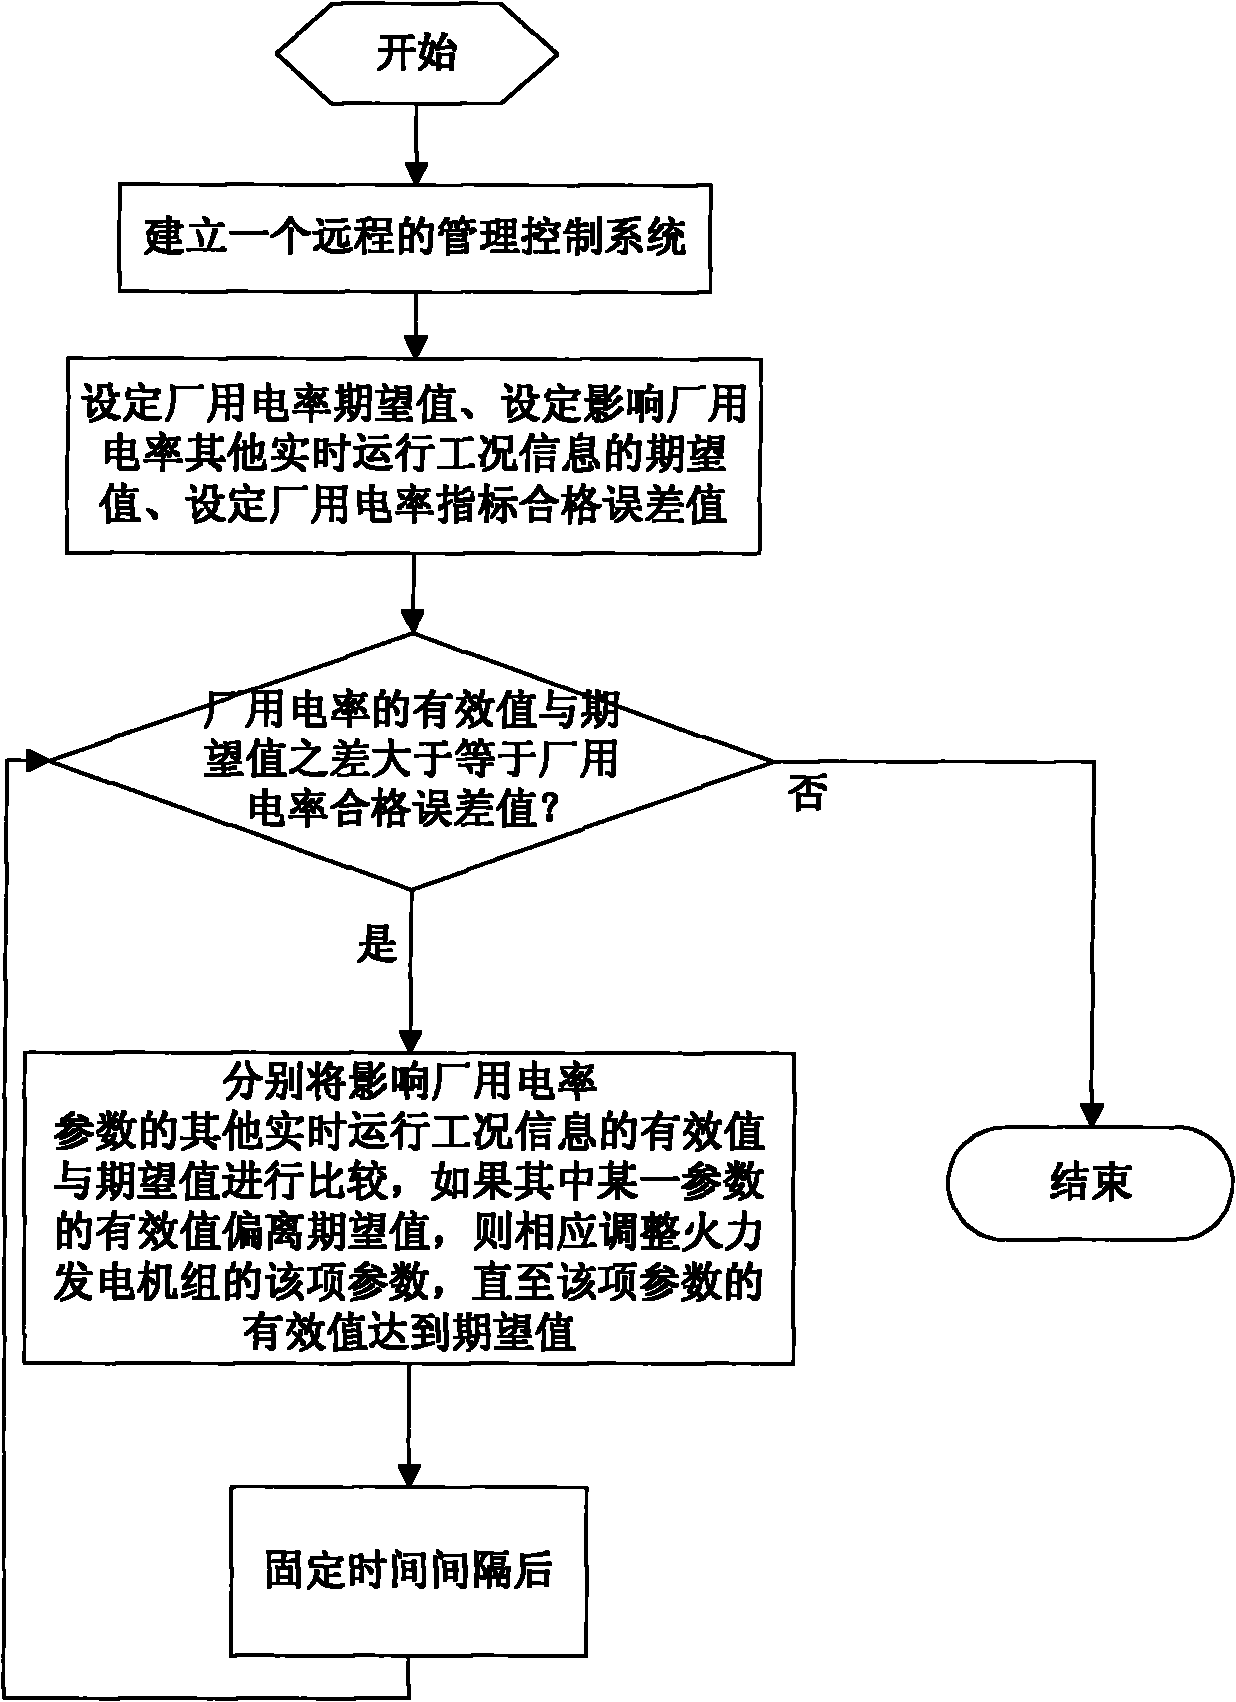 Method for reducing station service power consumption rate of thermal power generating units